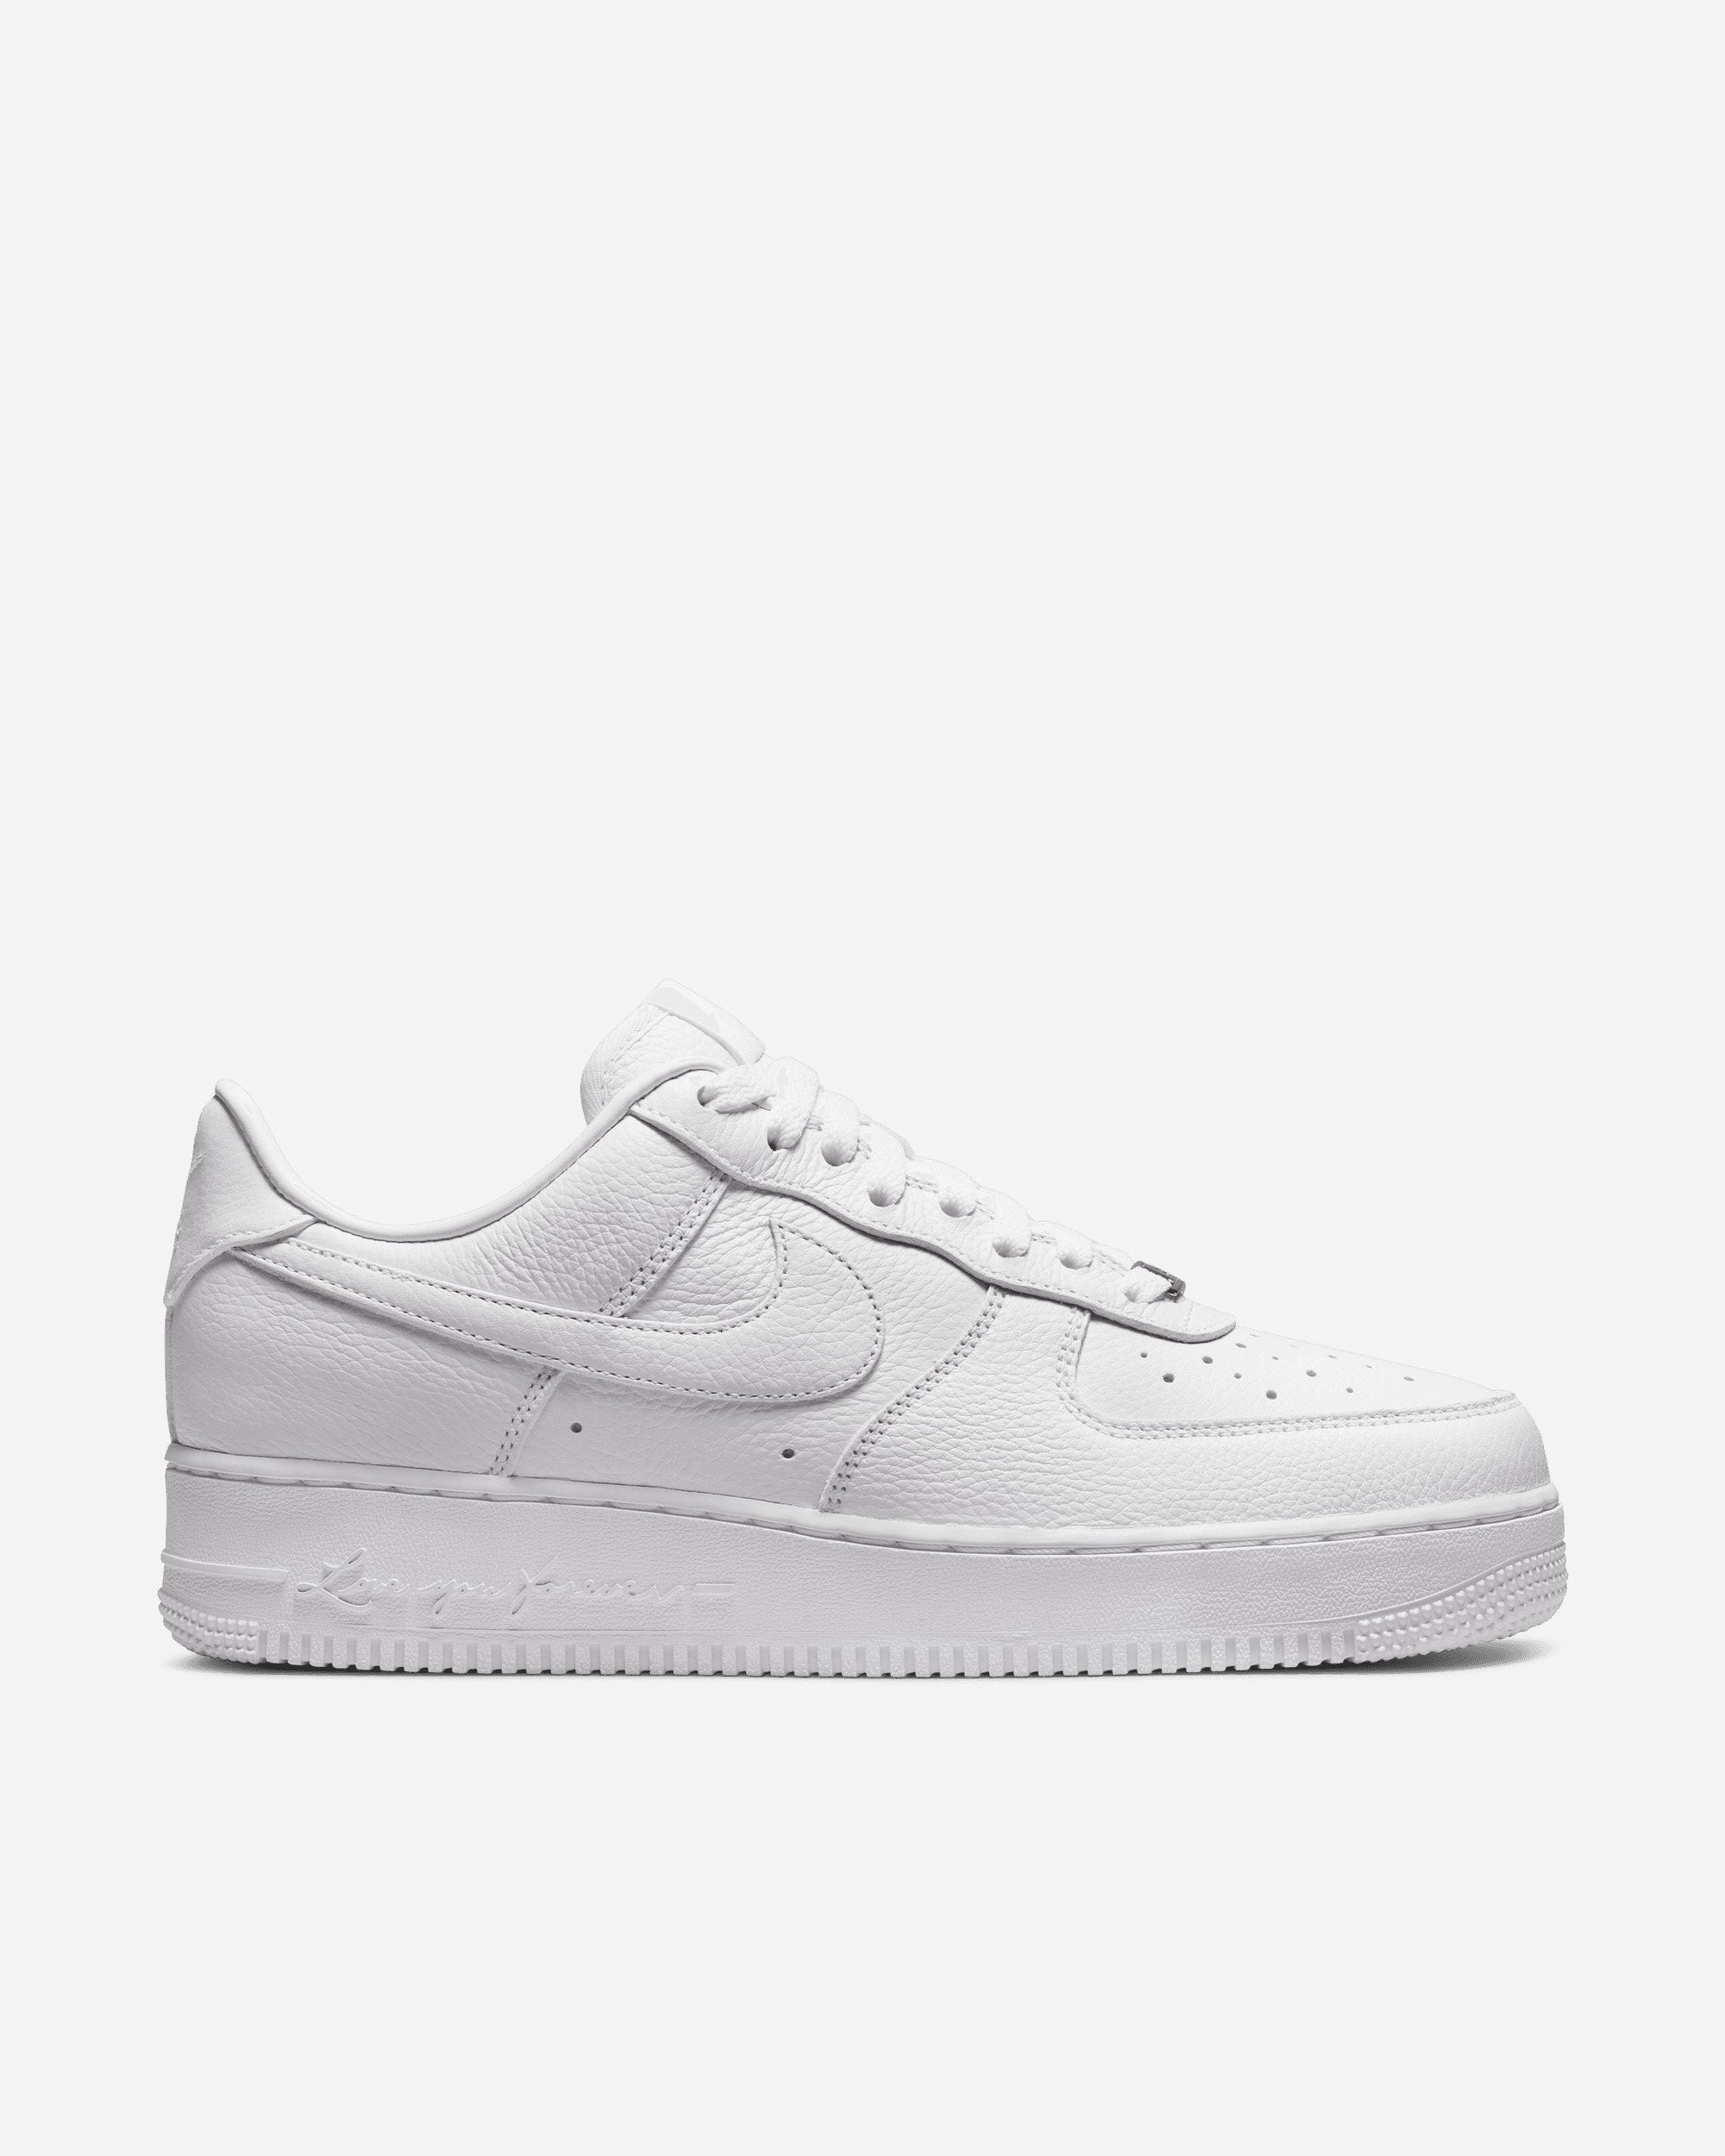 Nike x NOCTA Air Force 1 Low "Certified Lover Boy"